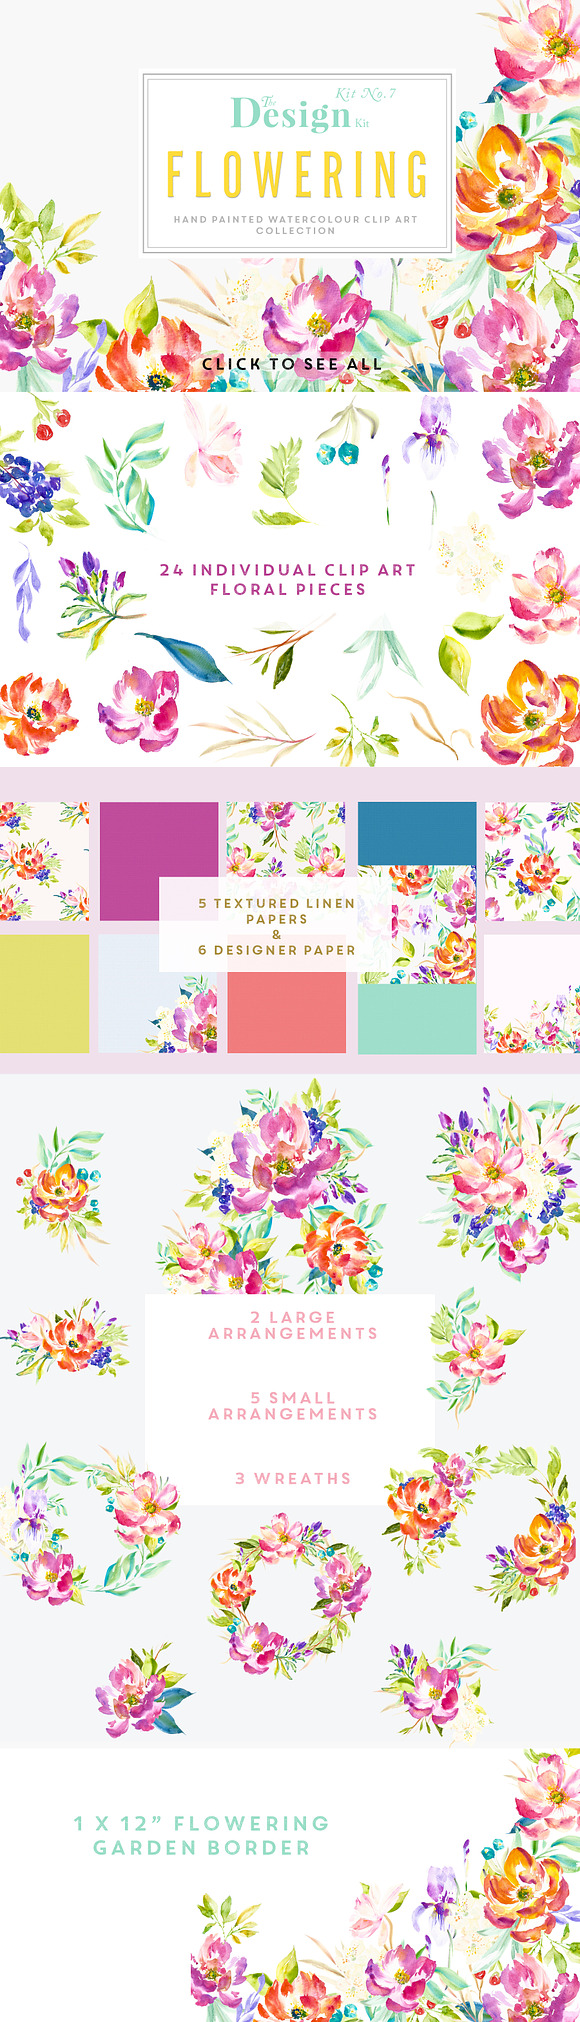 The Design Kit - Flowering in Illustrations - product preview 5